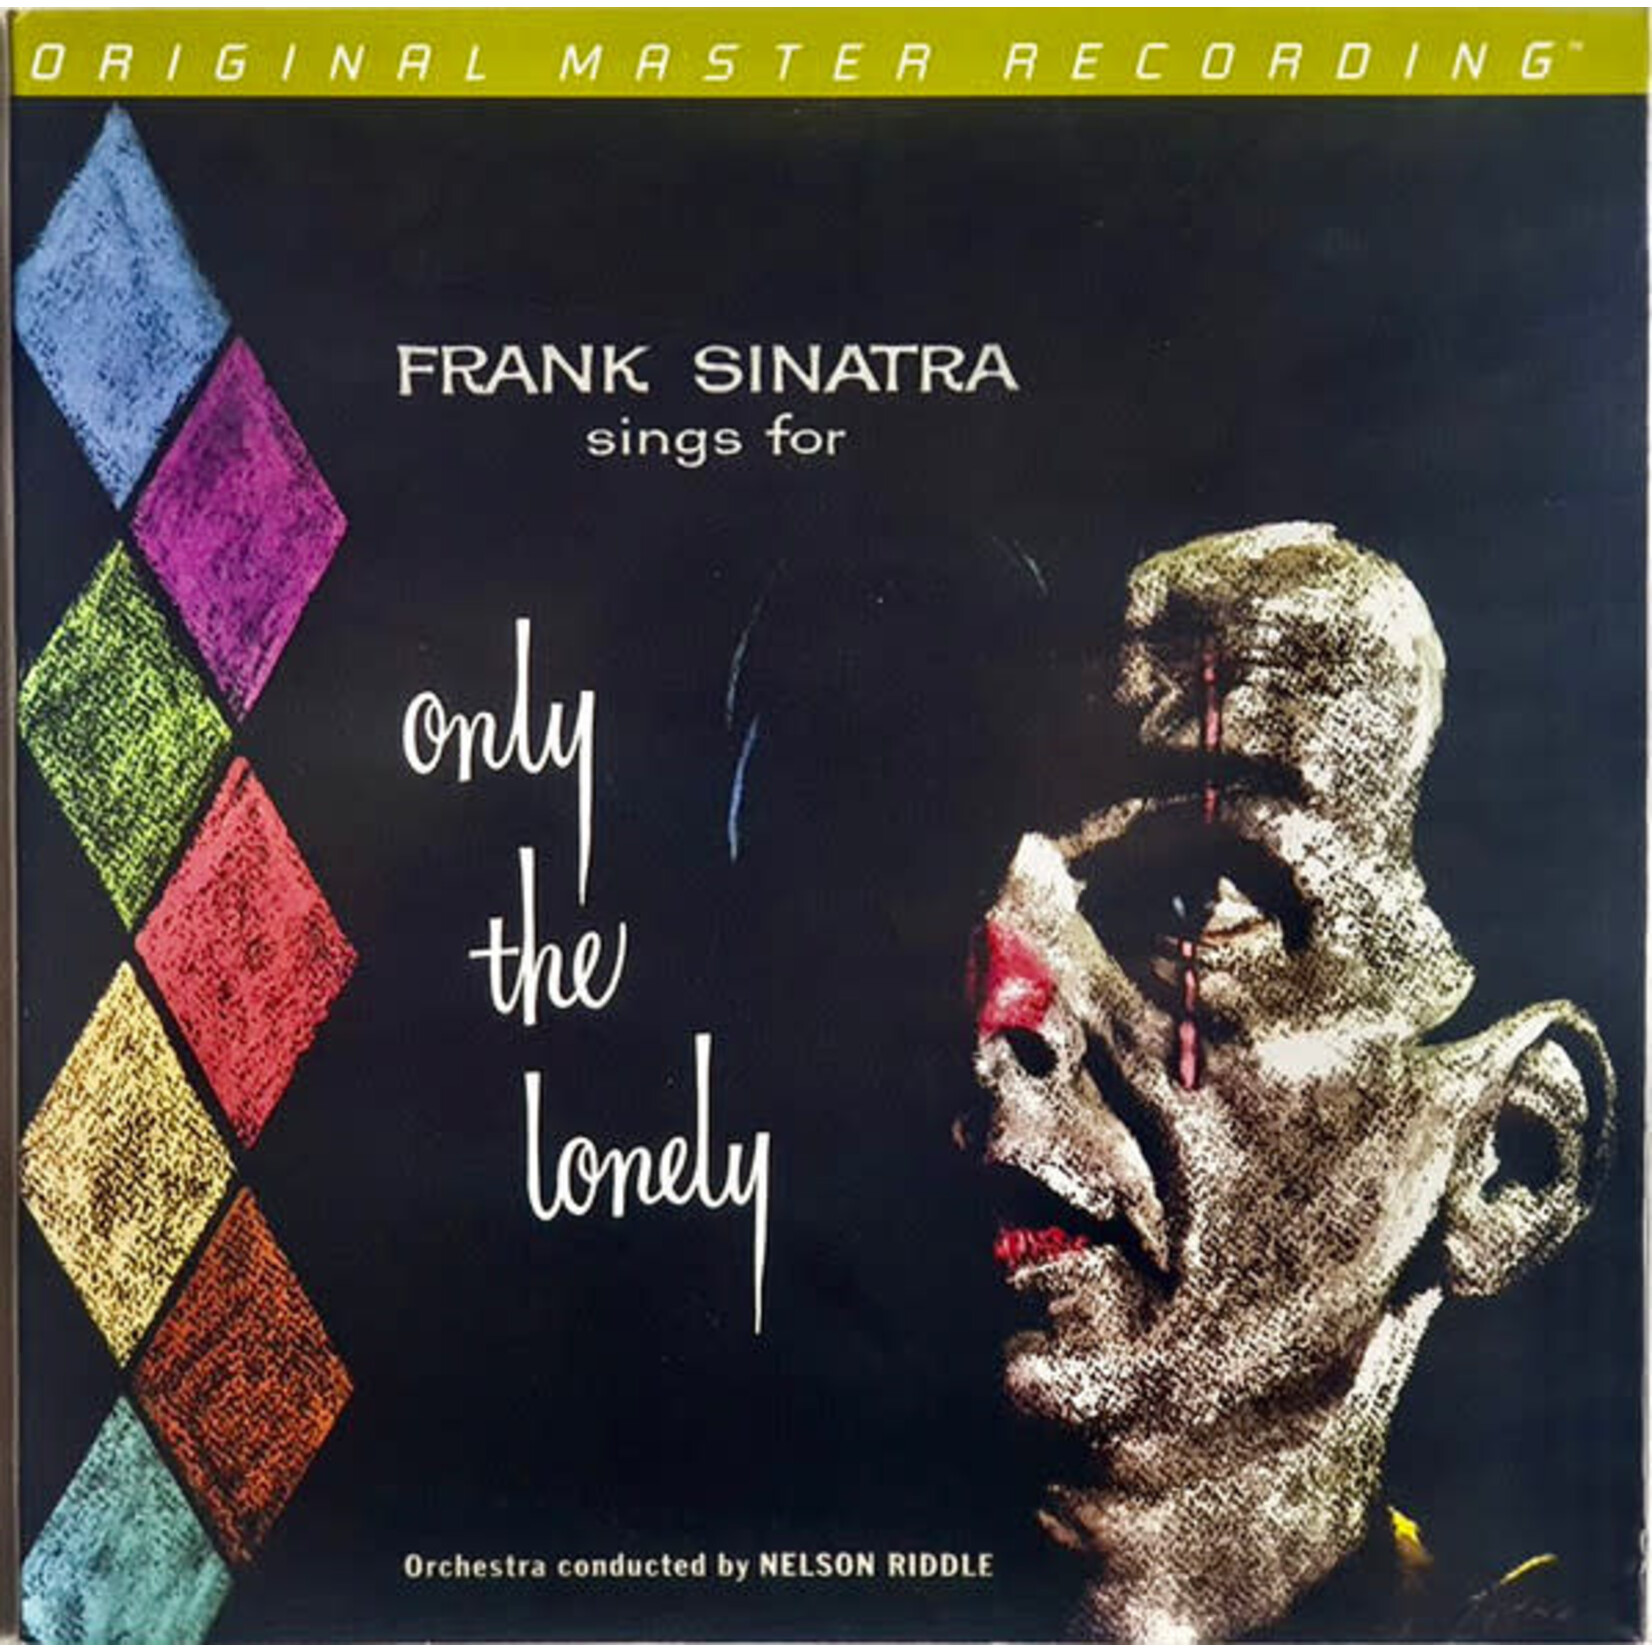 Sinatra, Frank: Sings for the Lonely (2009 Mobile Fidelity, Audiophile) [KOLLECTIBLES]